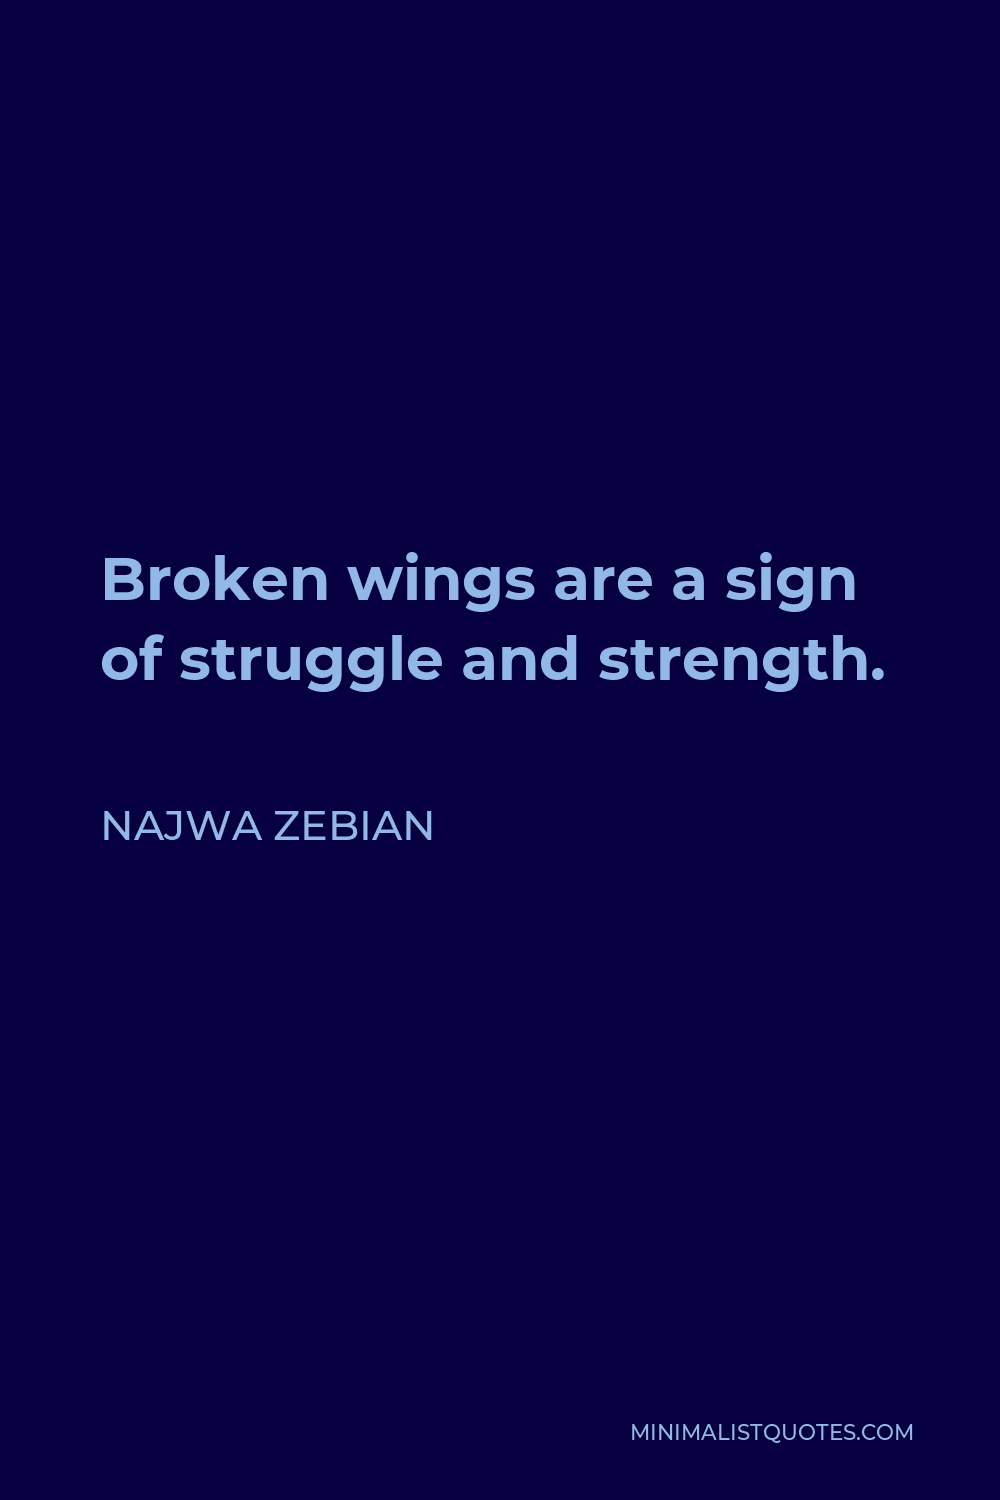 Najwa Zebian Quote - Broken wings are a sign of struggle and strength.